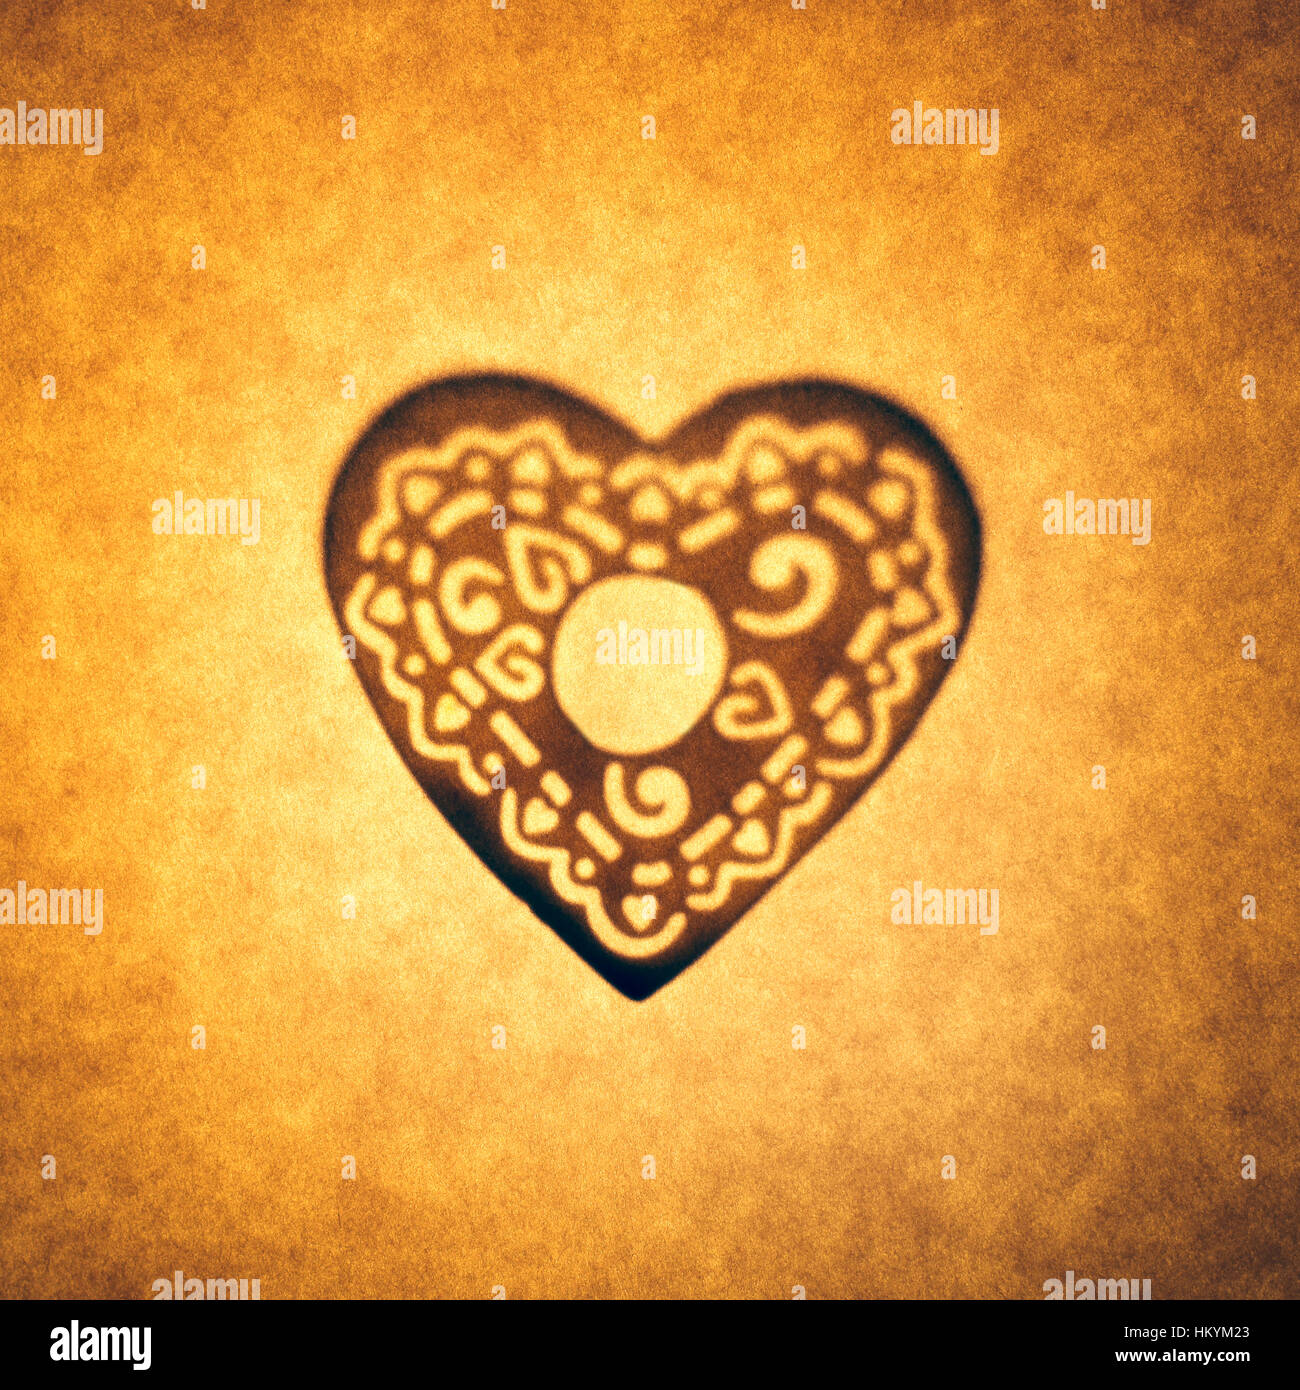 Backlit silhouette of heart shape cut out against brown tone paper, with spot highlight. Stock Photo